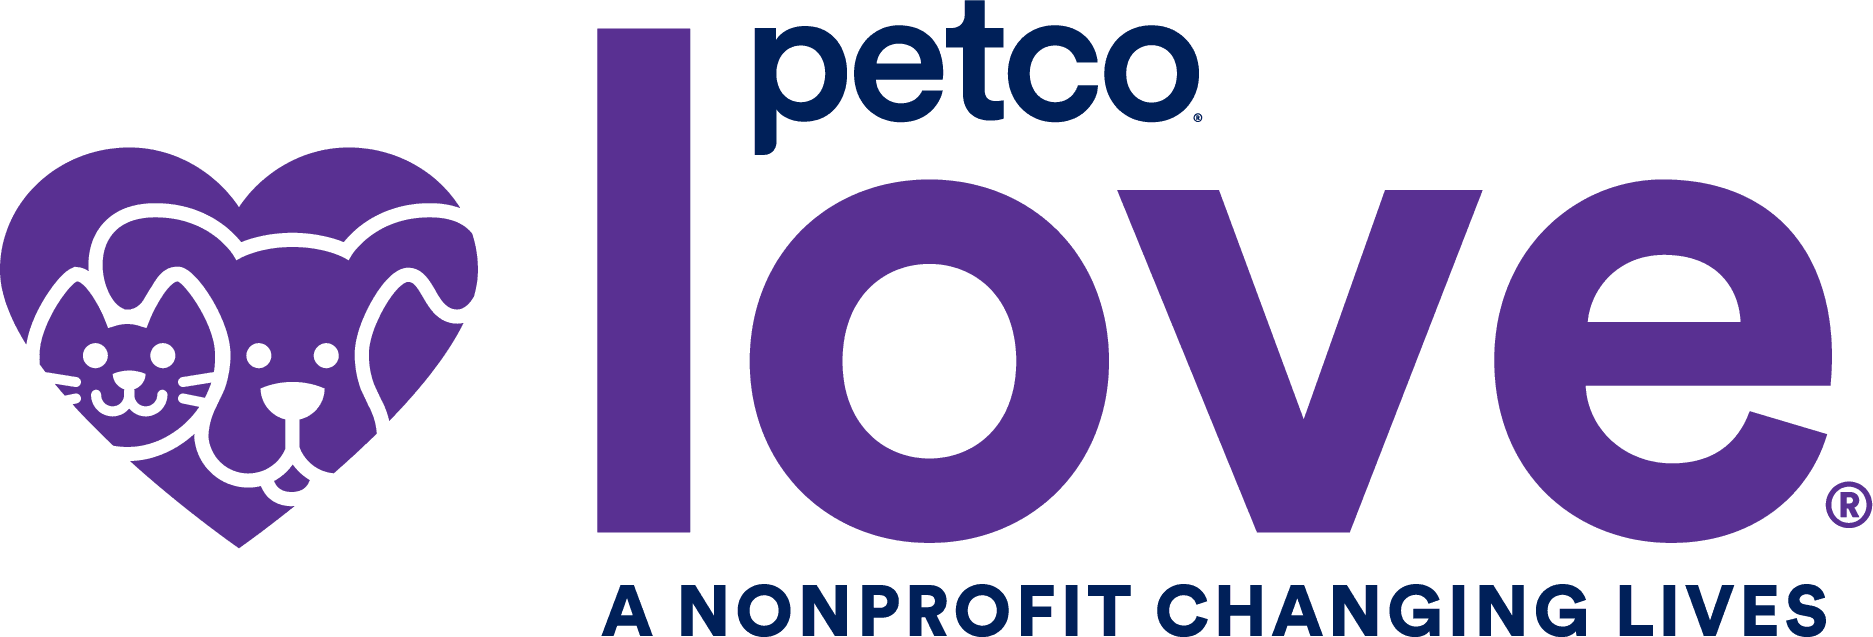 PETCO Love - A Nonprofit Changing Lives